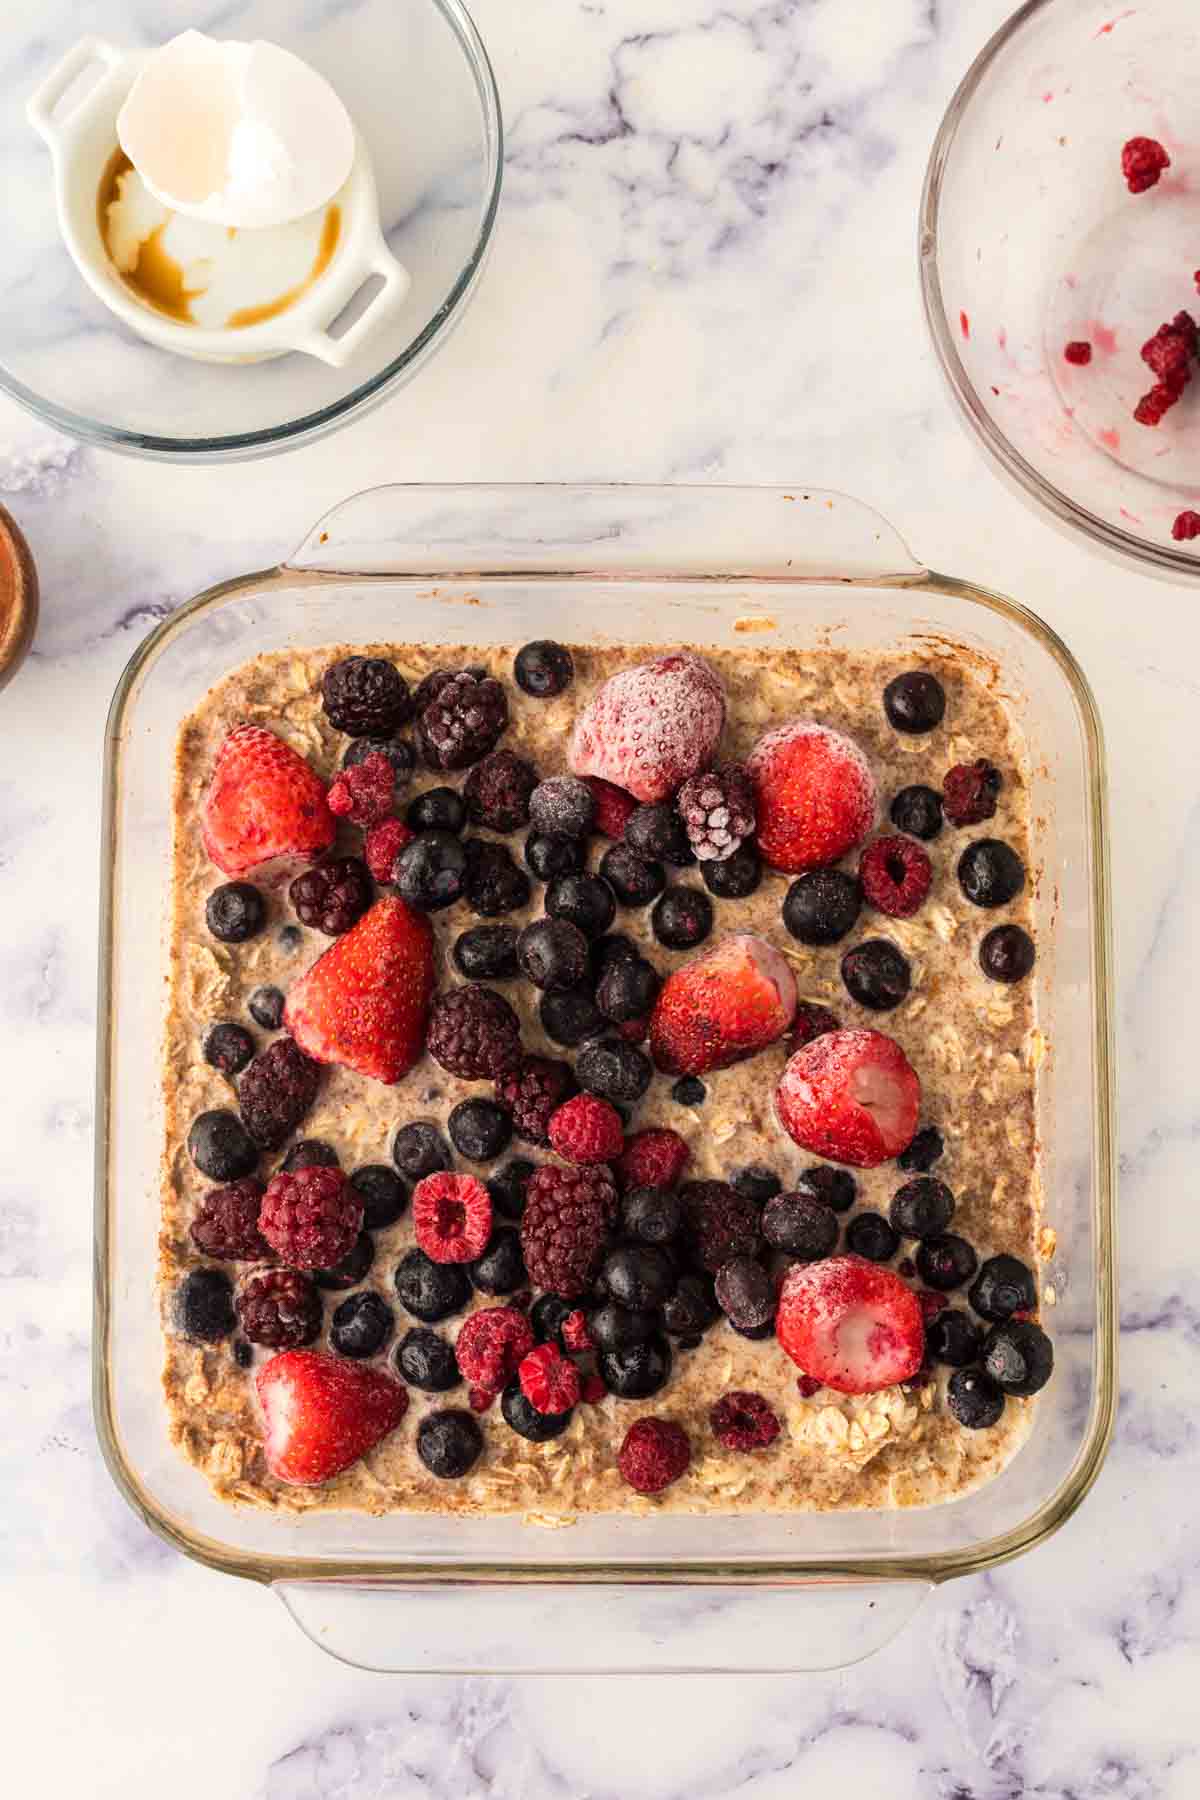 clear square casserole dish with baked oatmeal ingredients and fresh fruit inside